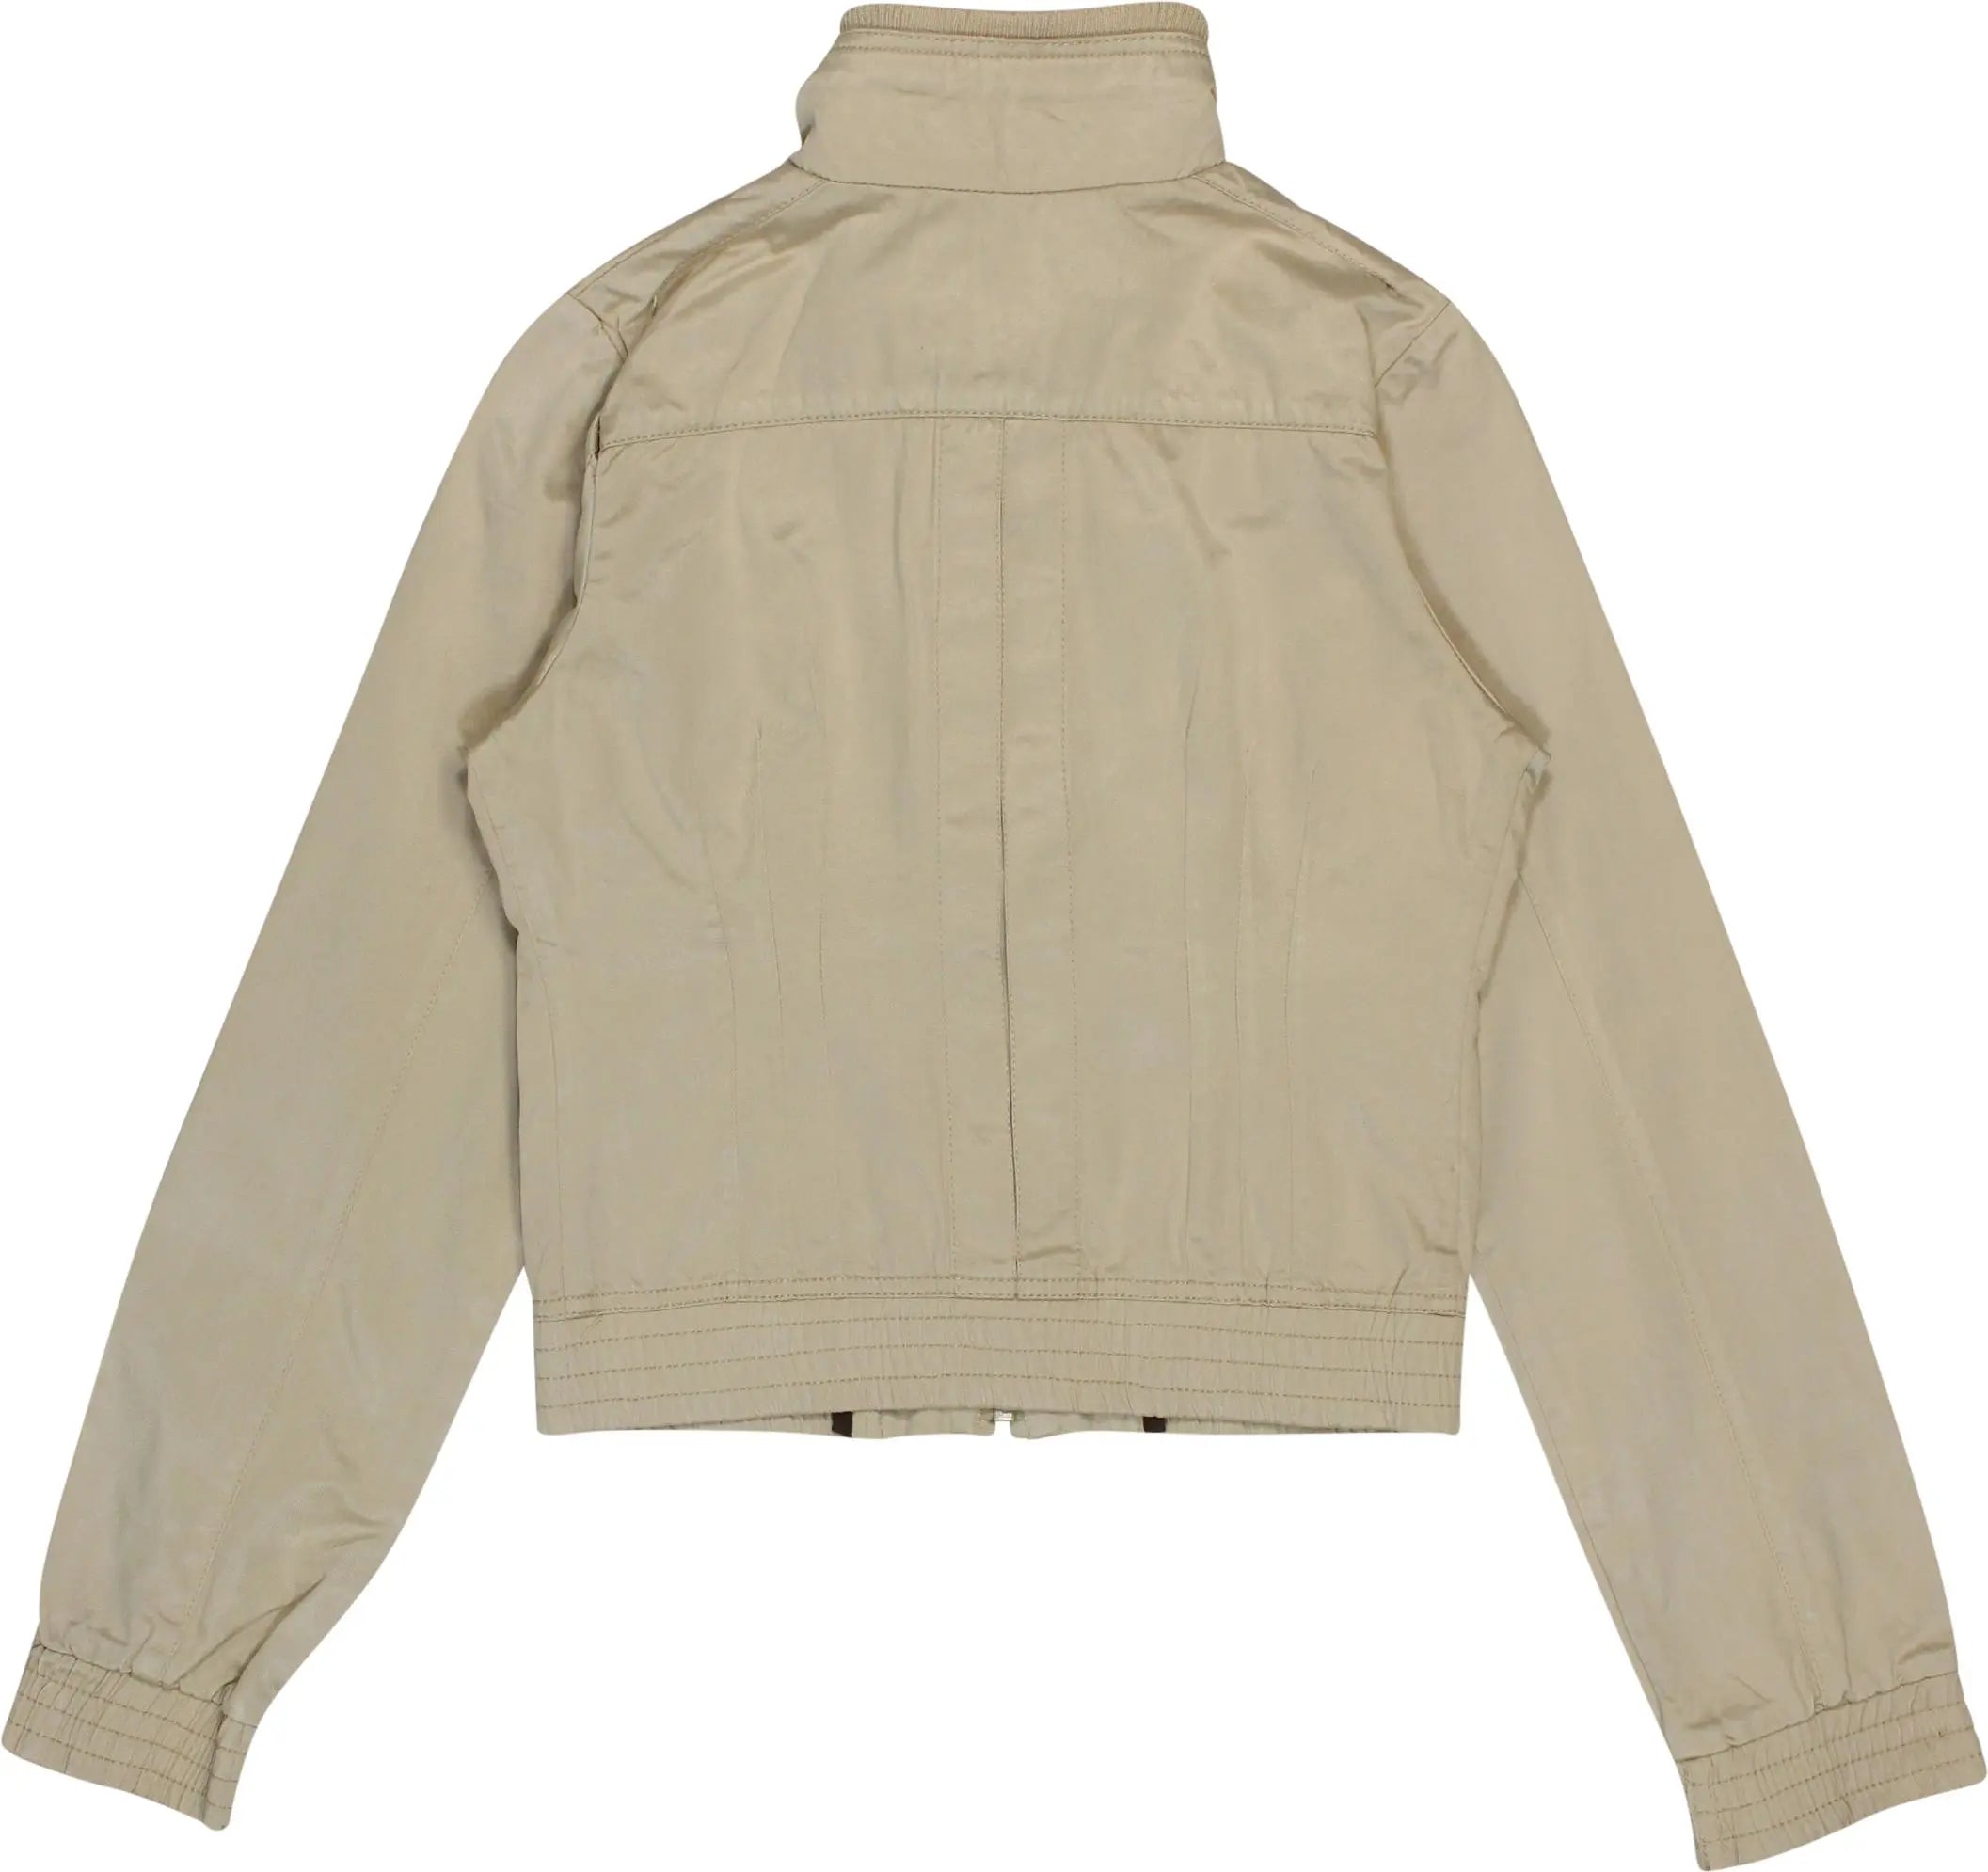 Opcao - Beige Jacket- ThriftTale.com - Vintage and second handclothing